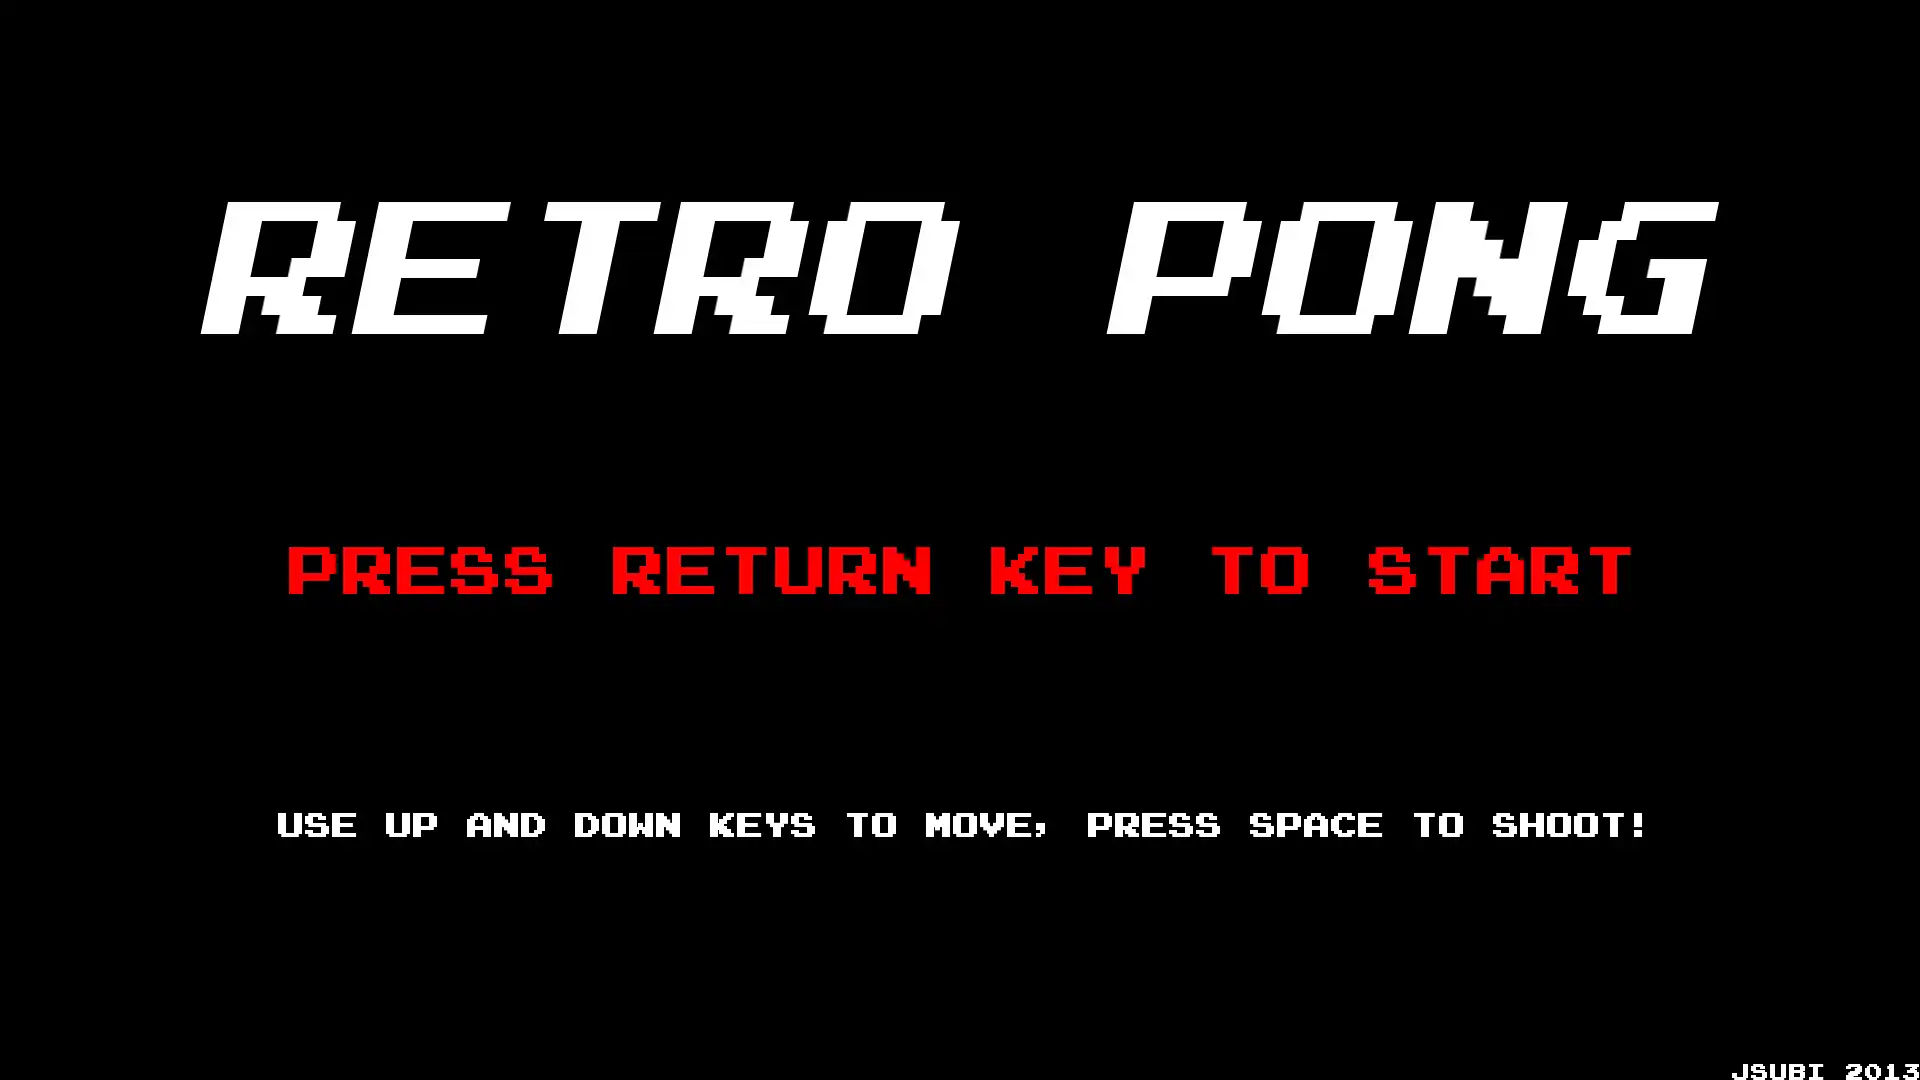 Download web tool or web app retropong to run in Linux online